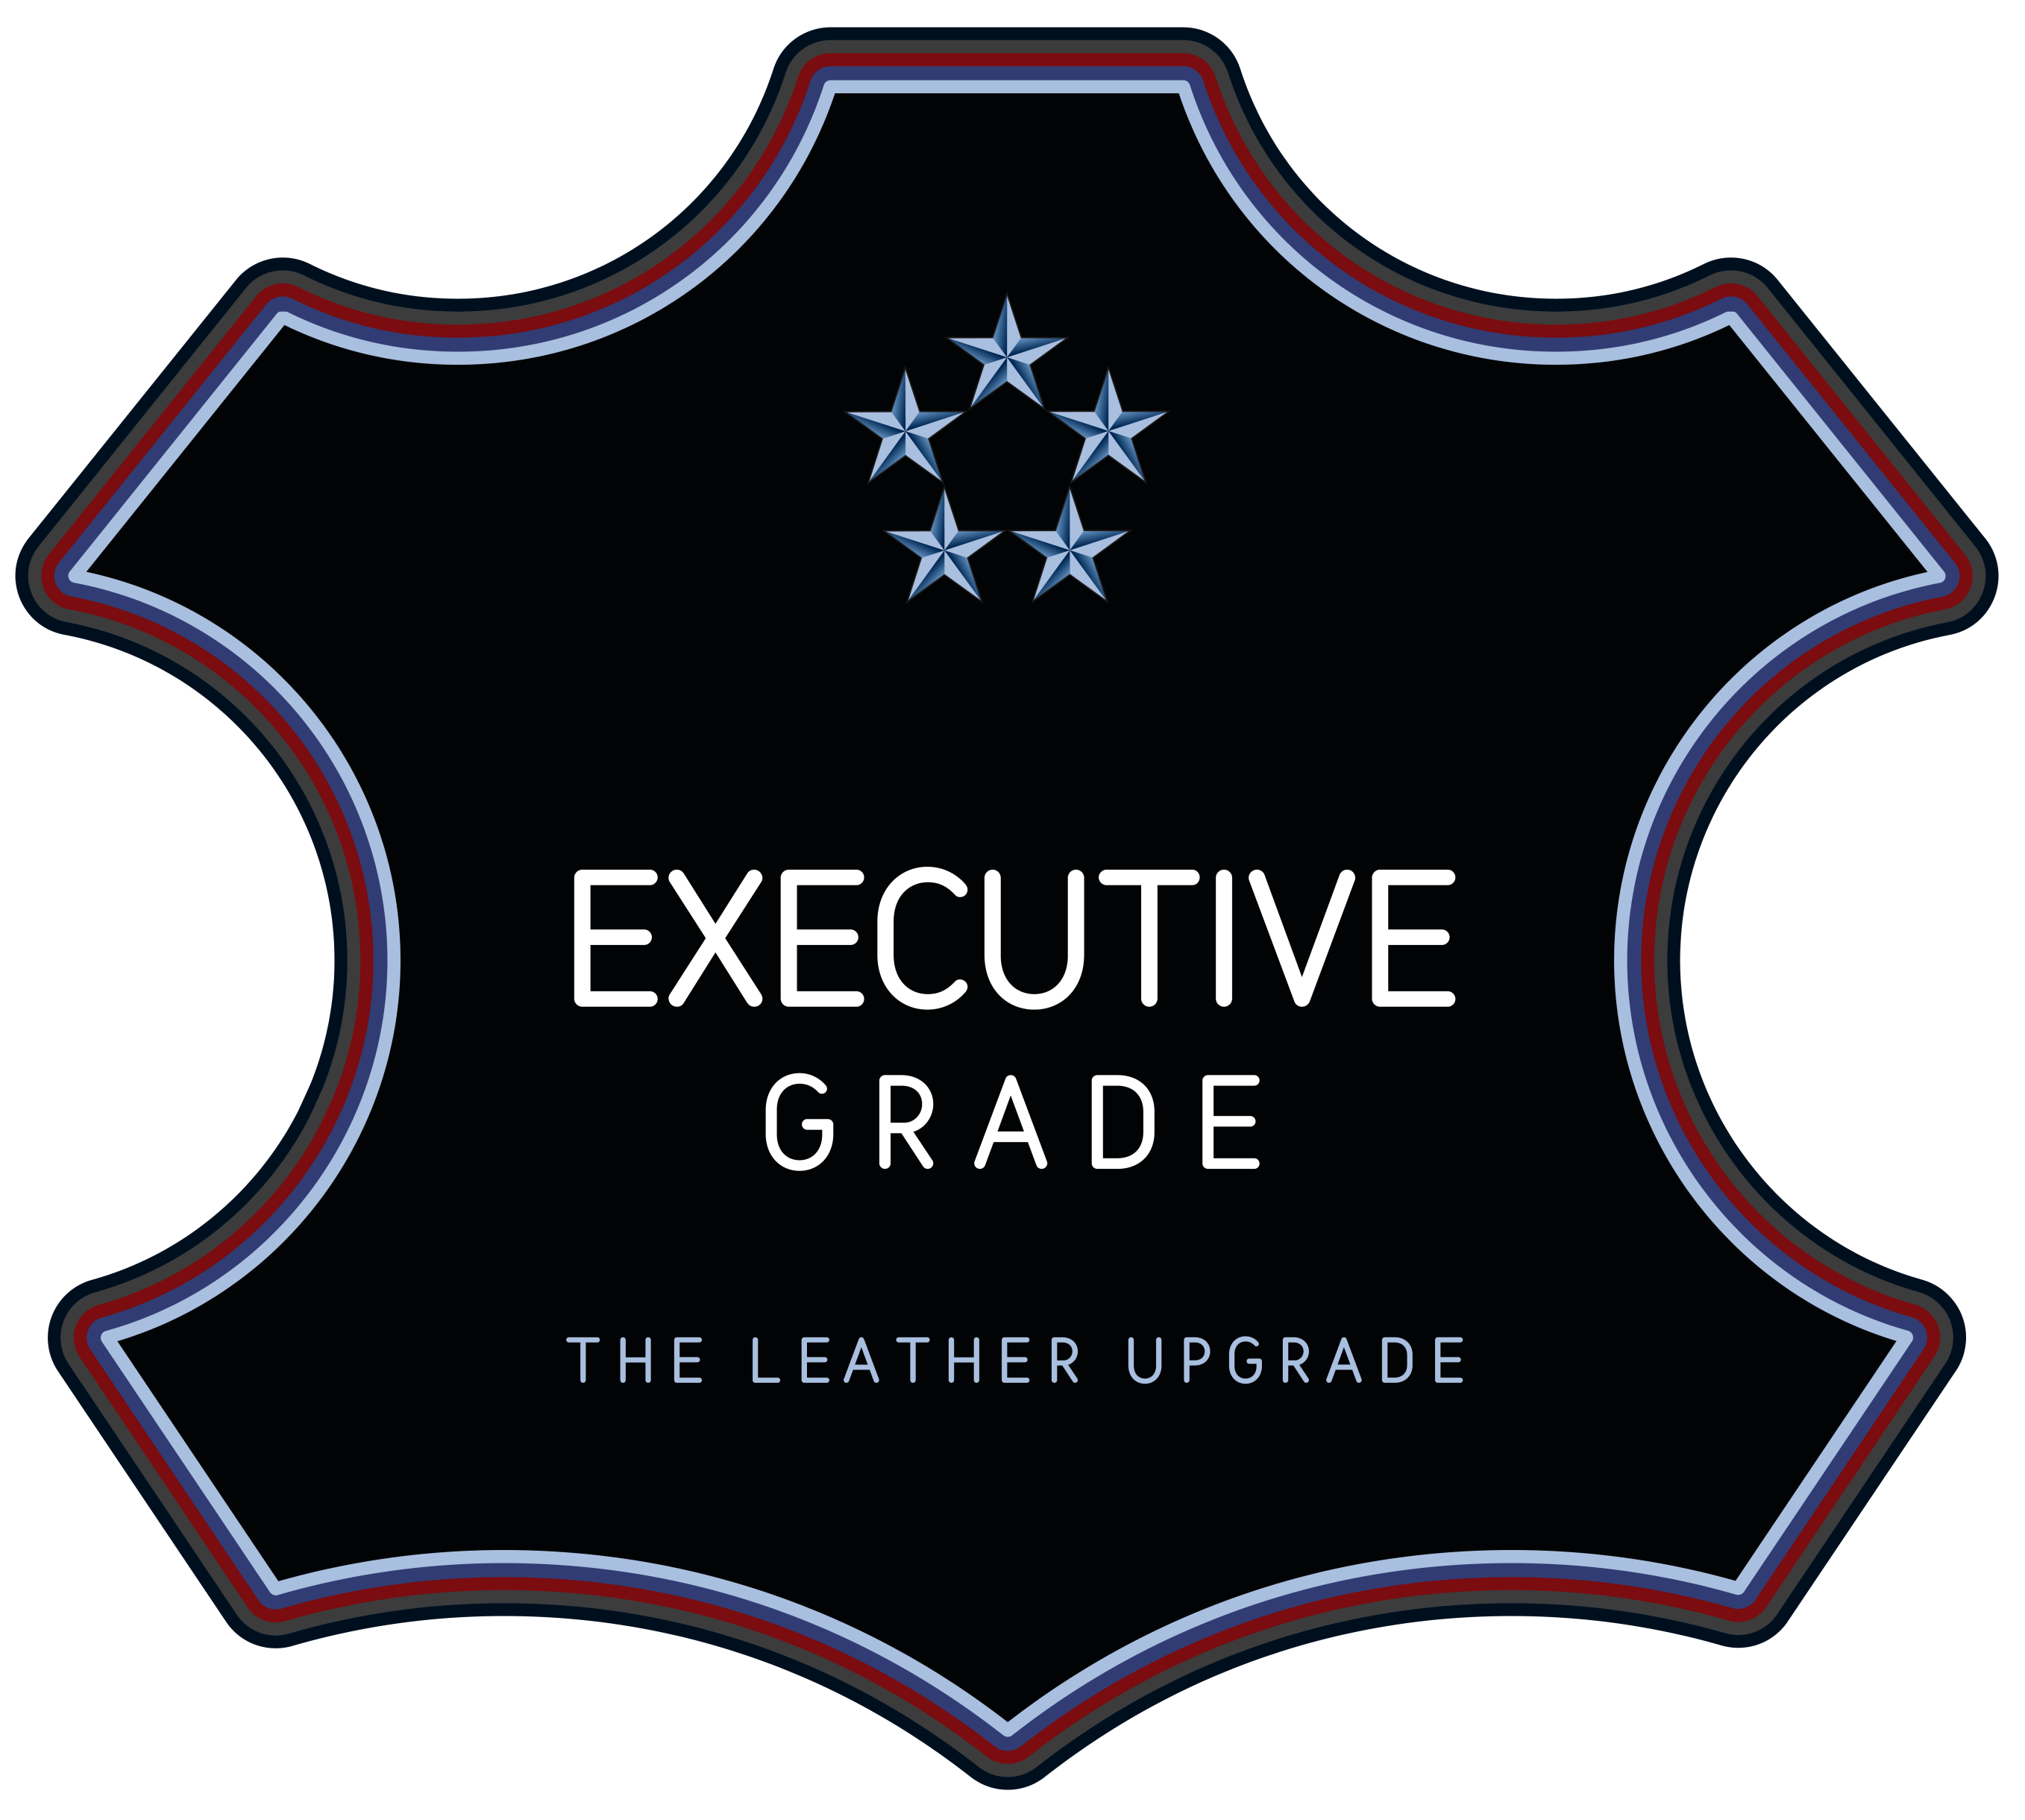 Executive Grade is the leather upgrade with remarkable innovations